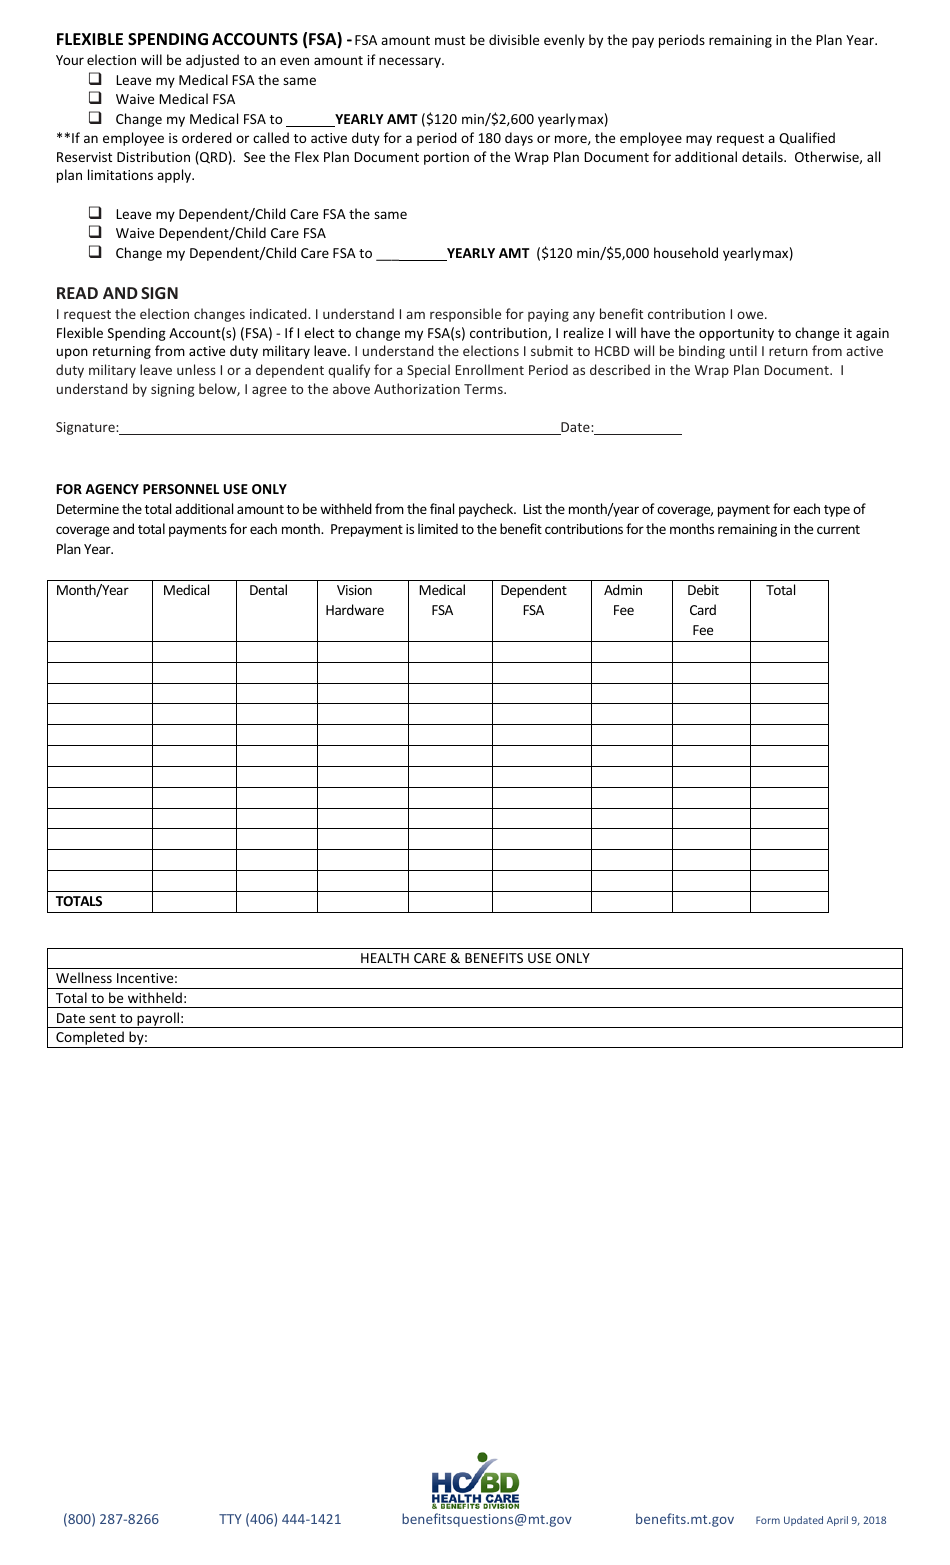 Montana Active Duty Military Leave Election Form Fill Out Sign Online And Download Pdf 9854